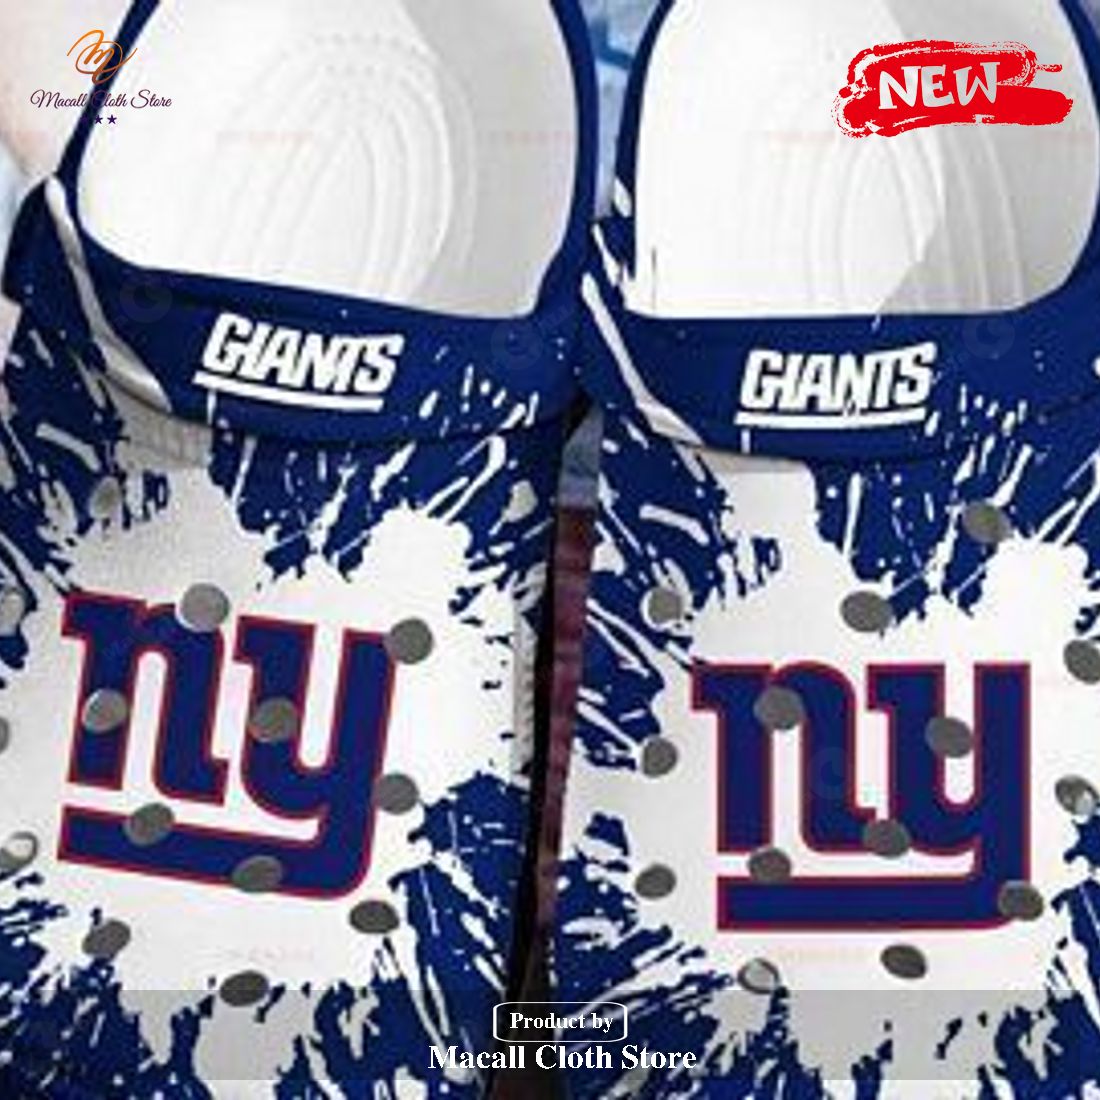 NEW] New York Giants Crocs New York Giants Charms New York Giants  Comfortable Classic Clogs Shoes For Mens And Womens - Macall Cloth Store -  Destination for fashionistas